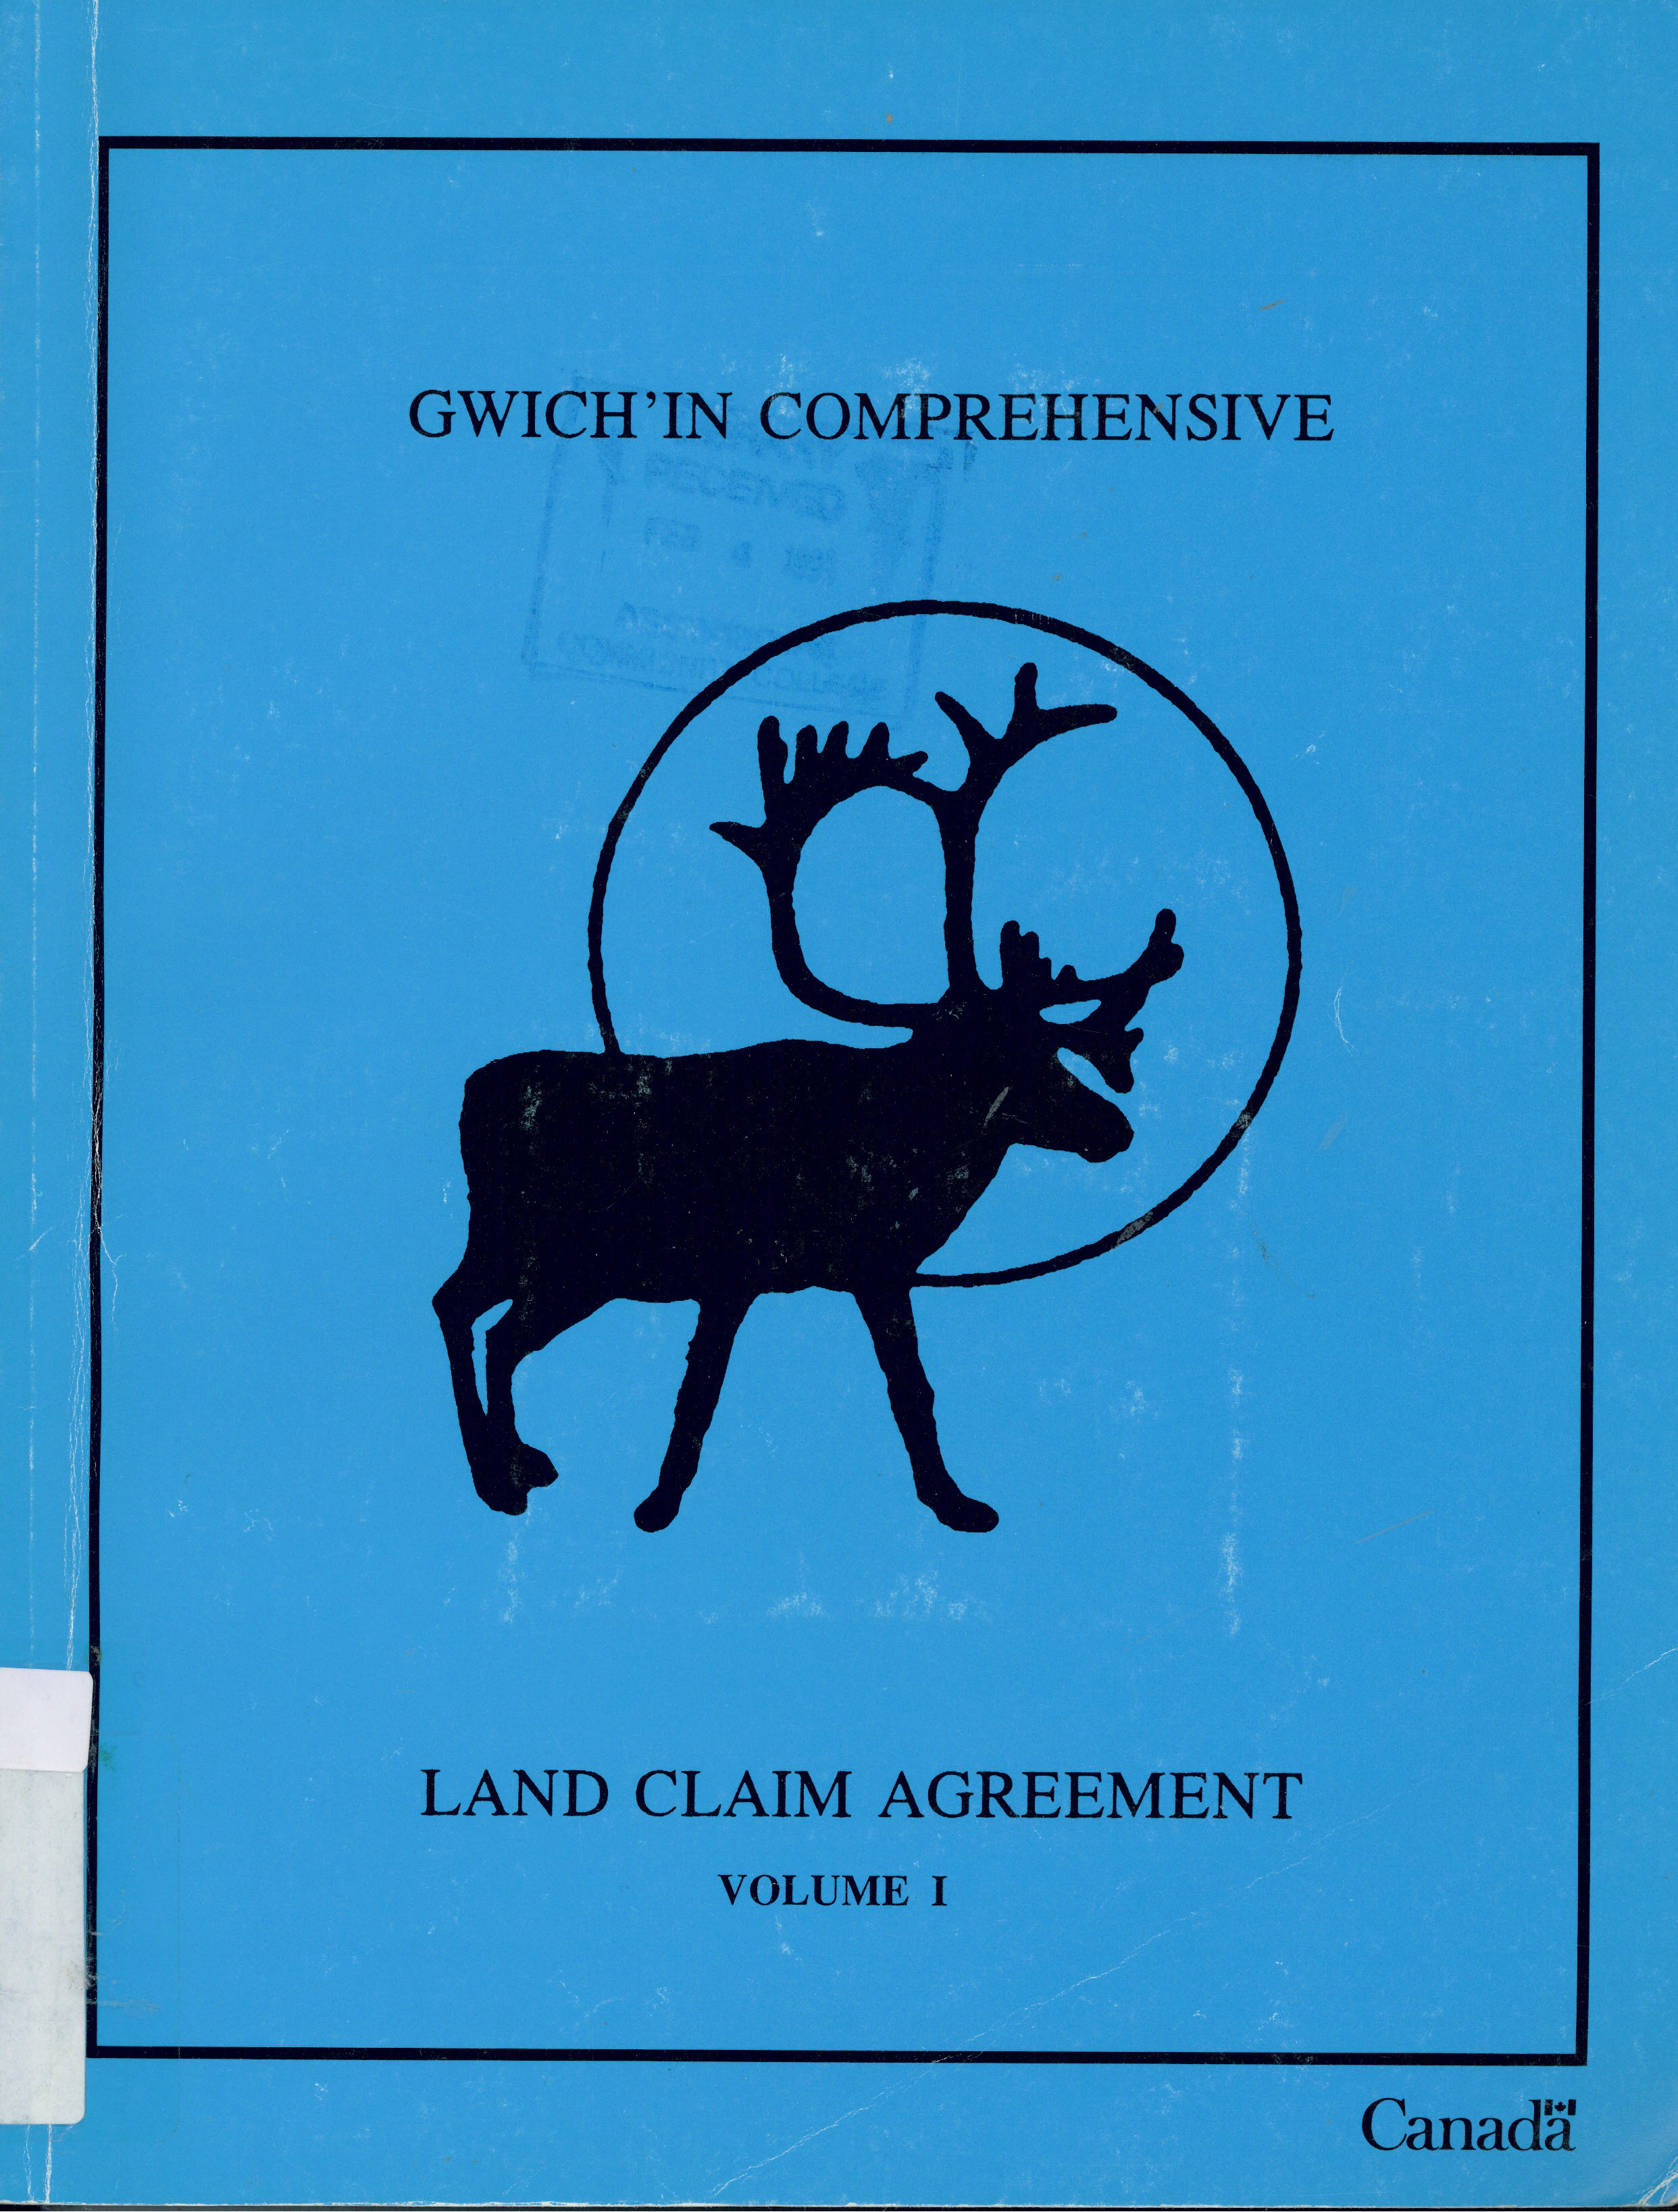 Gwich'in comprehensive land claim agreement